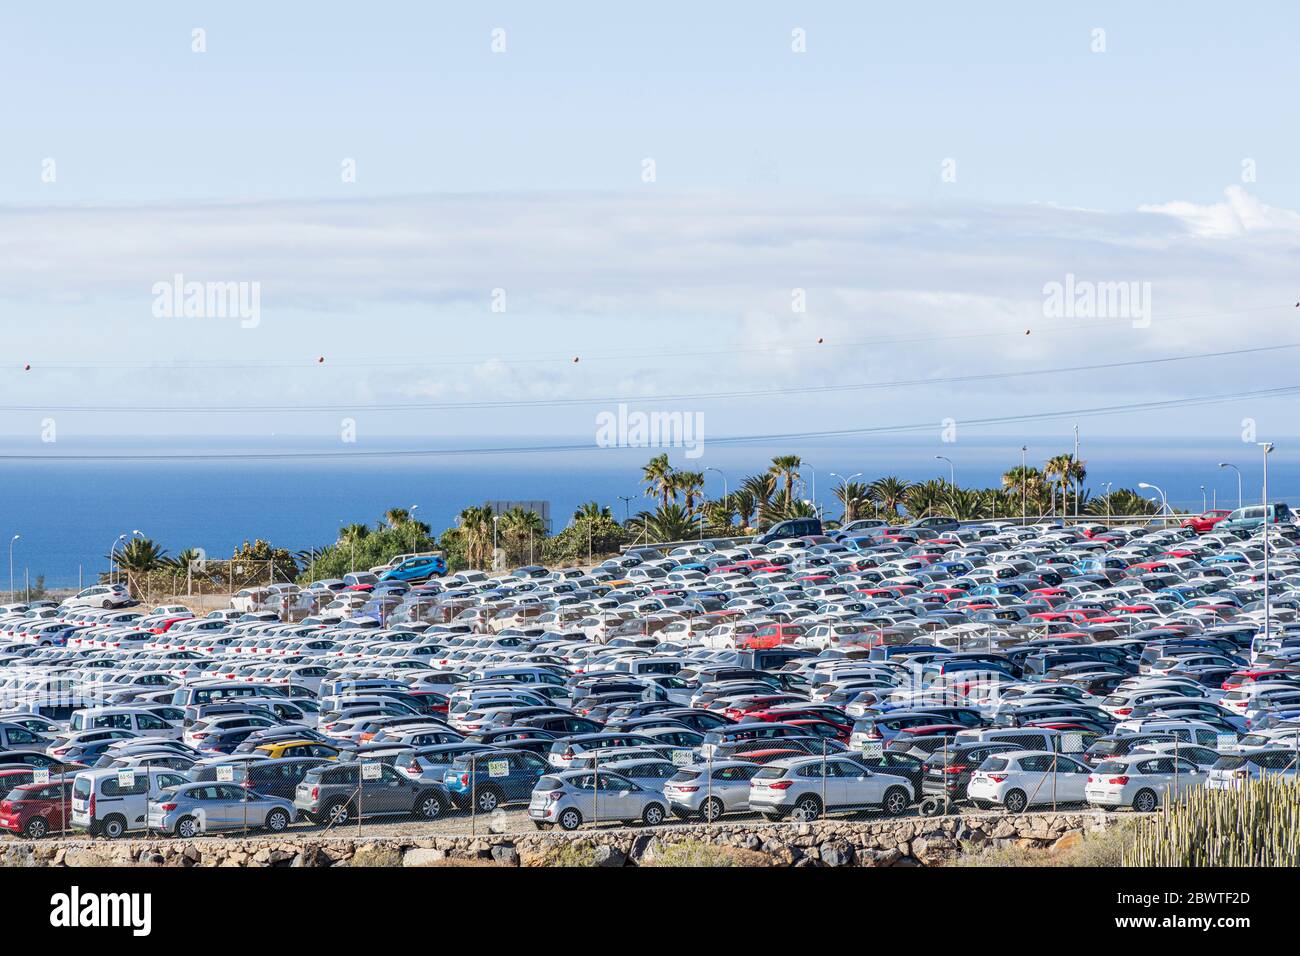 Thousands of unused hire cars are parked up in temporary storage due to the effects of zero tourism and no holidaymakers coming to the island. The rental cars sit gathering dust waiting until tourists are allowed back in. It's hoped that the covid 19, corona virus lockdown will be fully lifted by the end of June and international flights will return. Tenerife, Canary Islands, Spain. 3rd June, 2020. Stock Photo